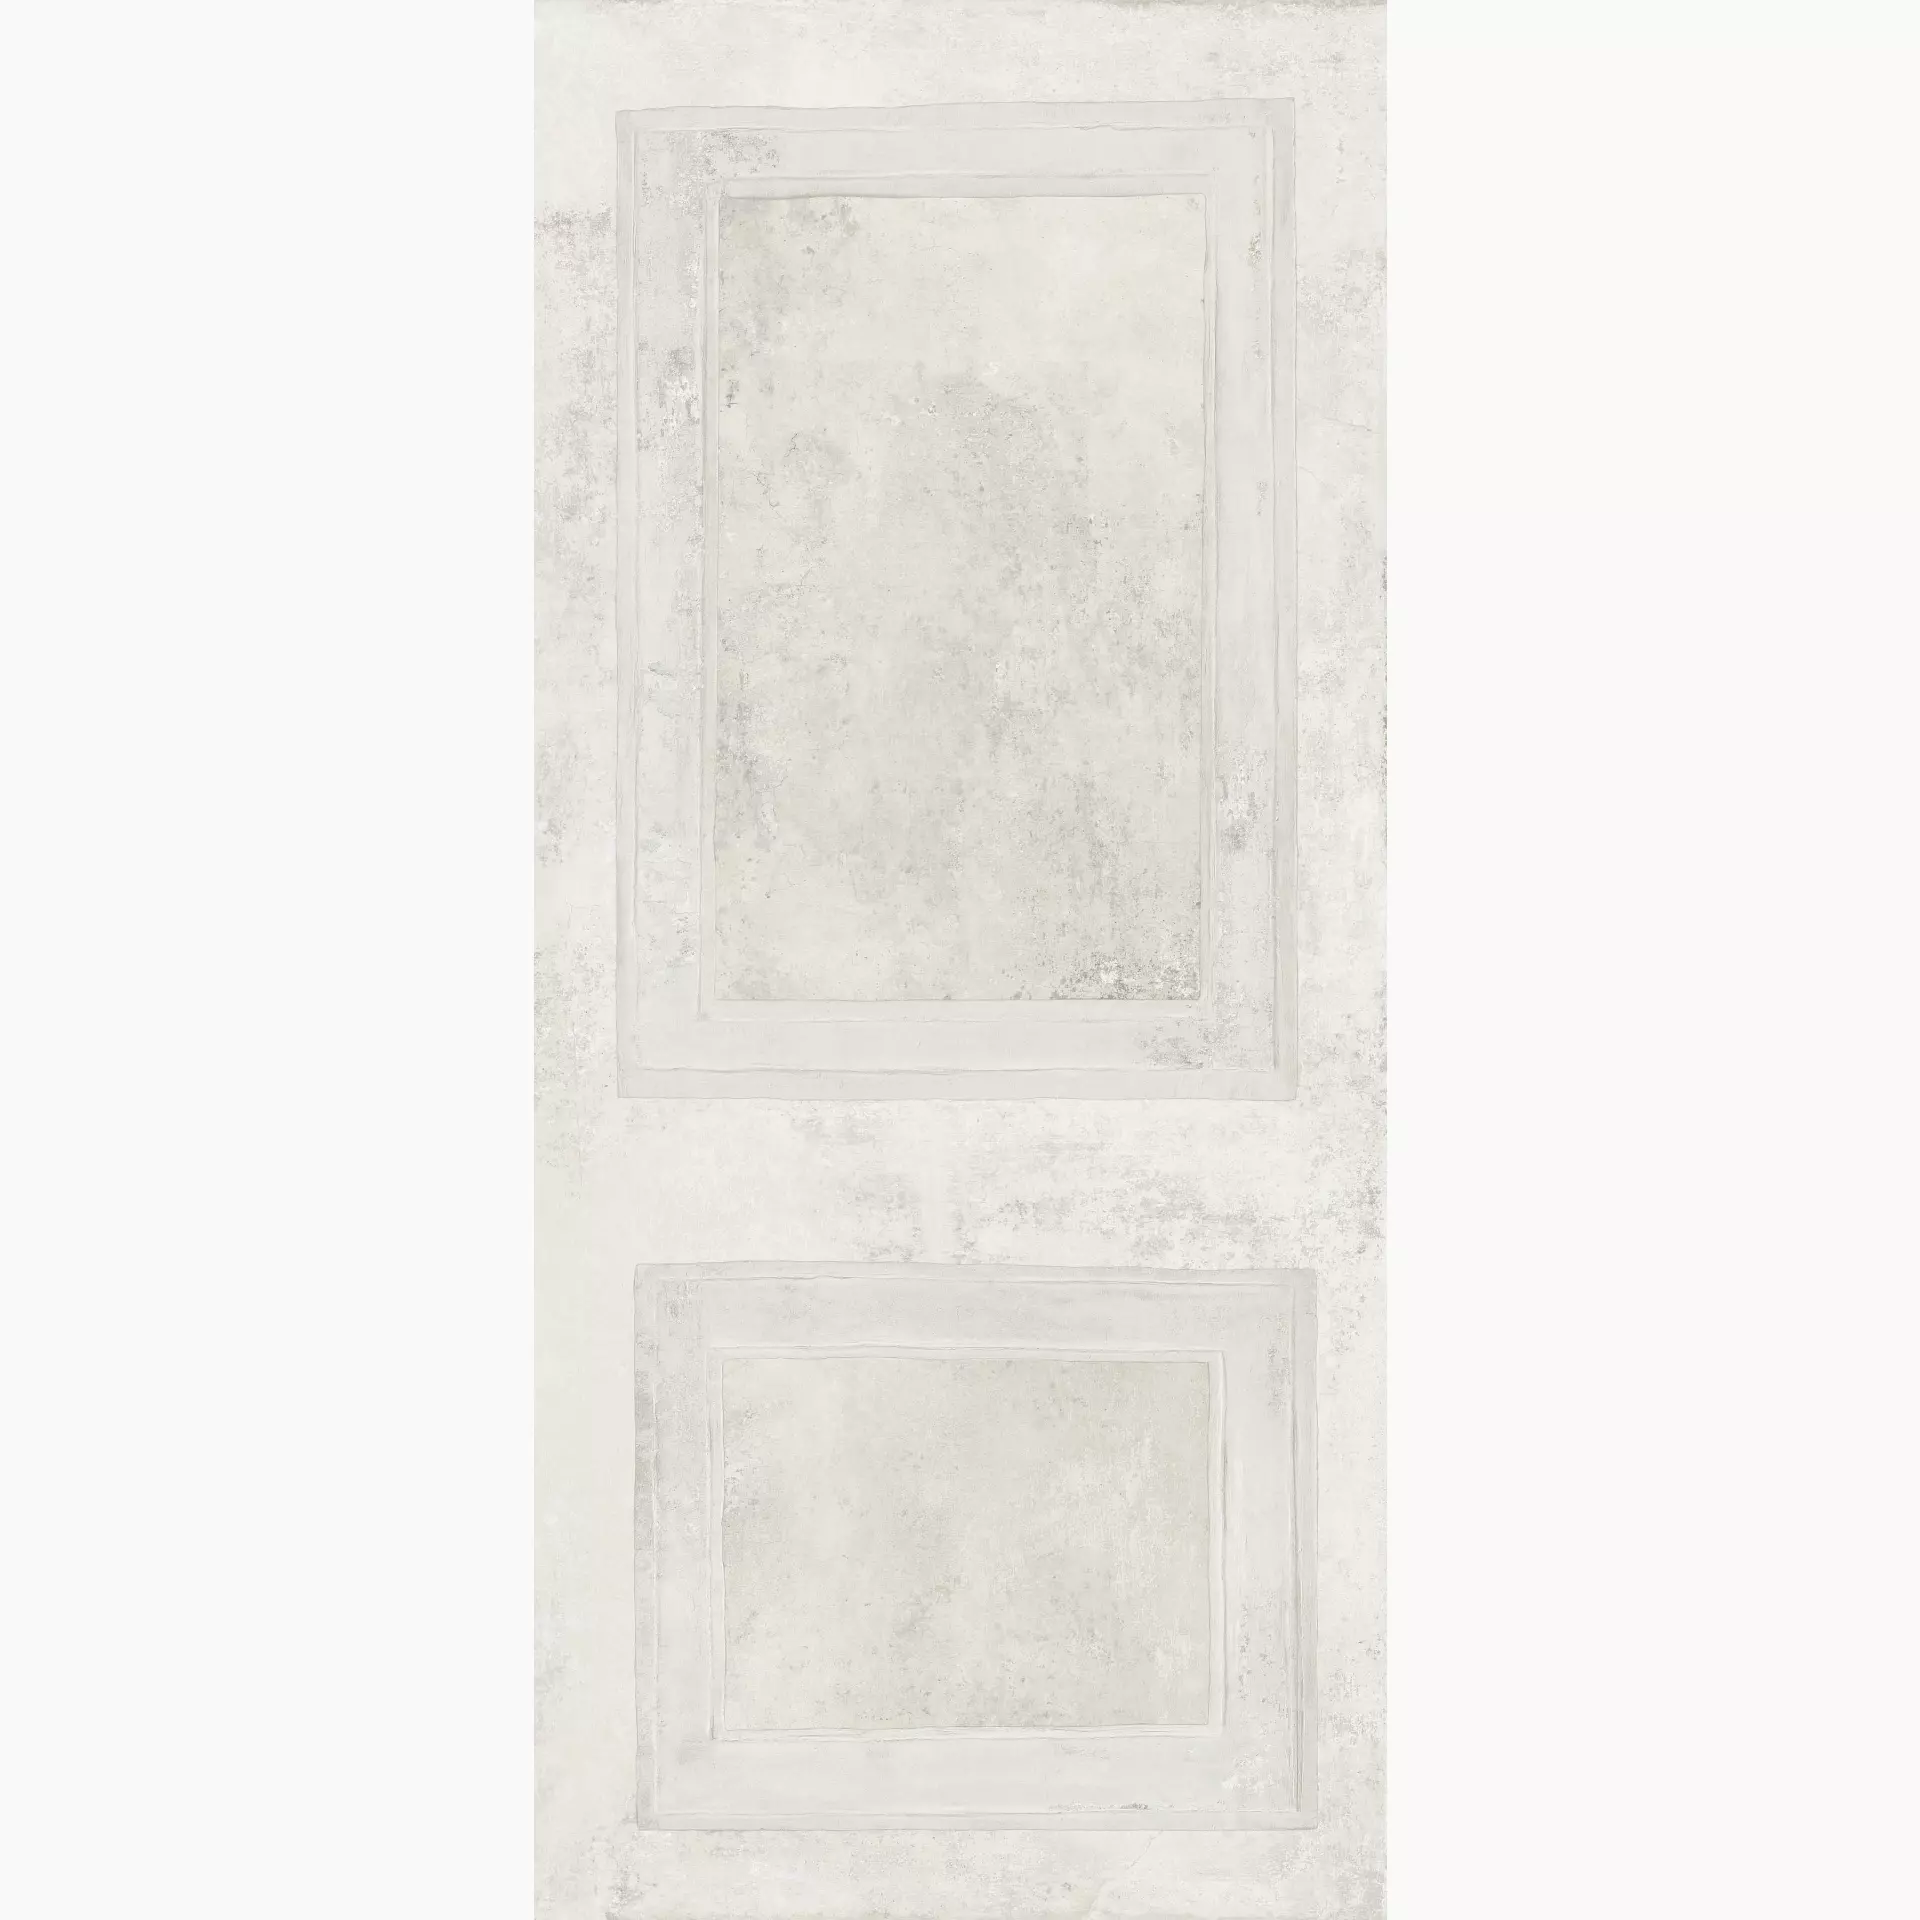 ABK Ghost Ivory Naturale Boiserie PF60008197 120x280cm rectified 6mm